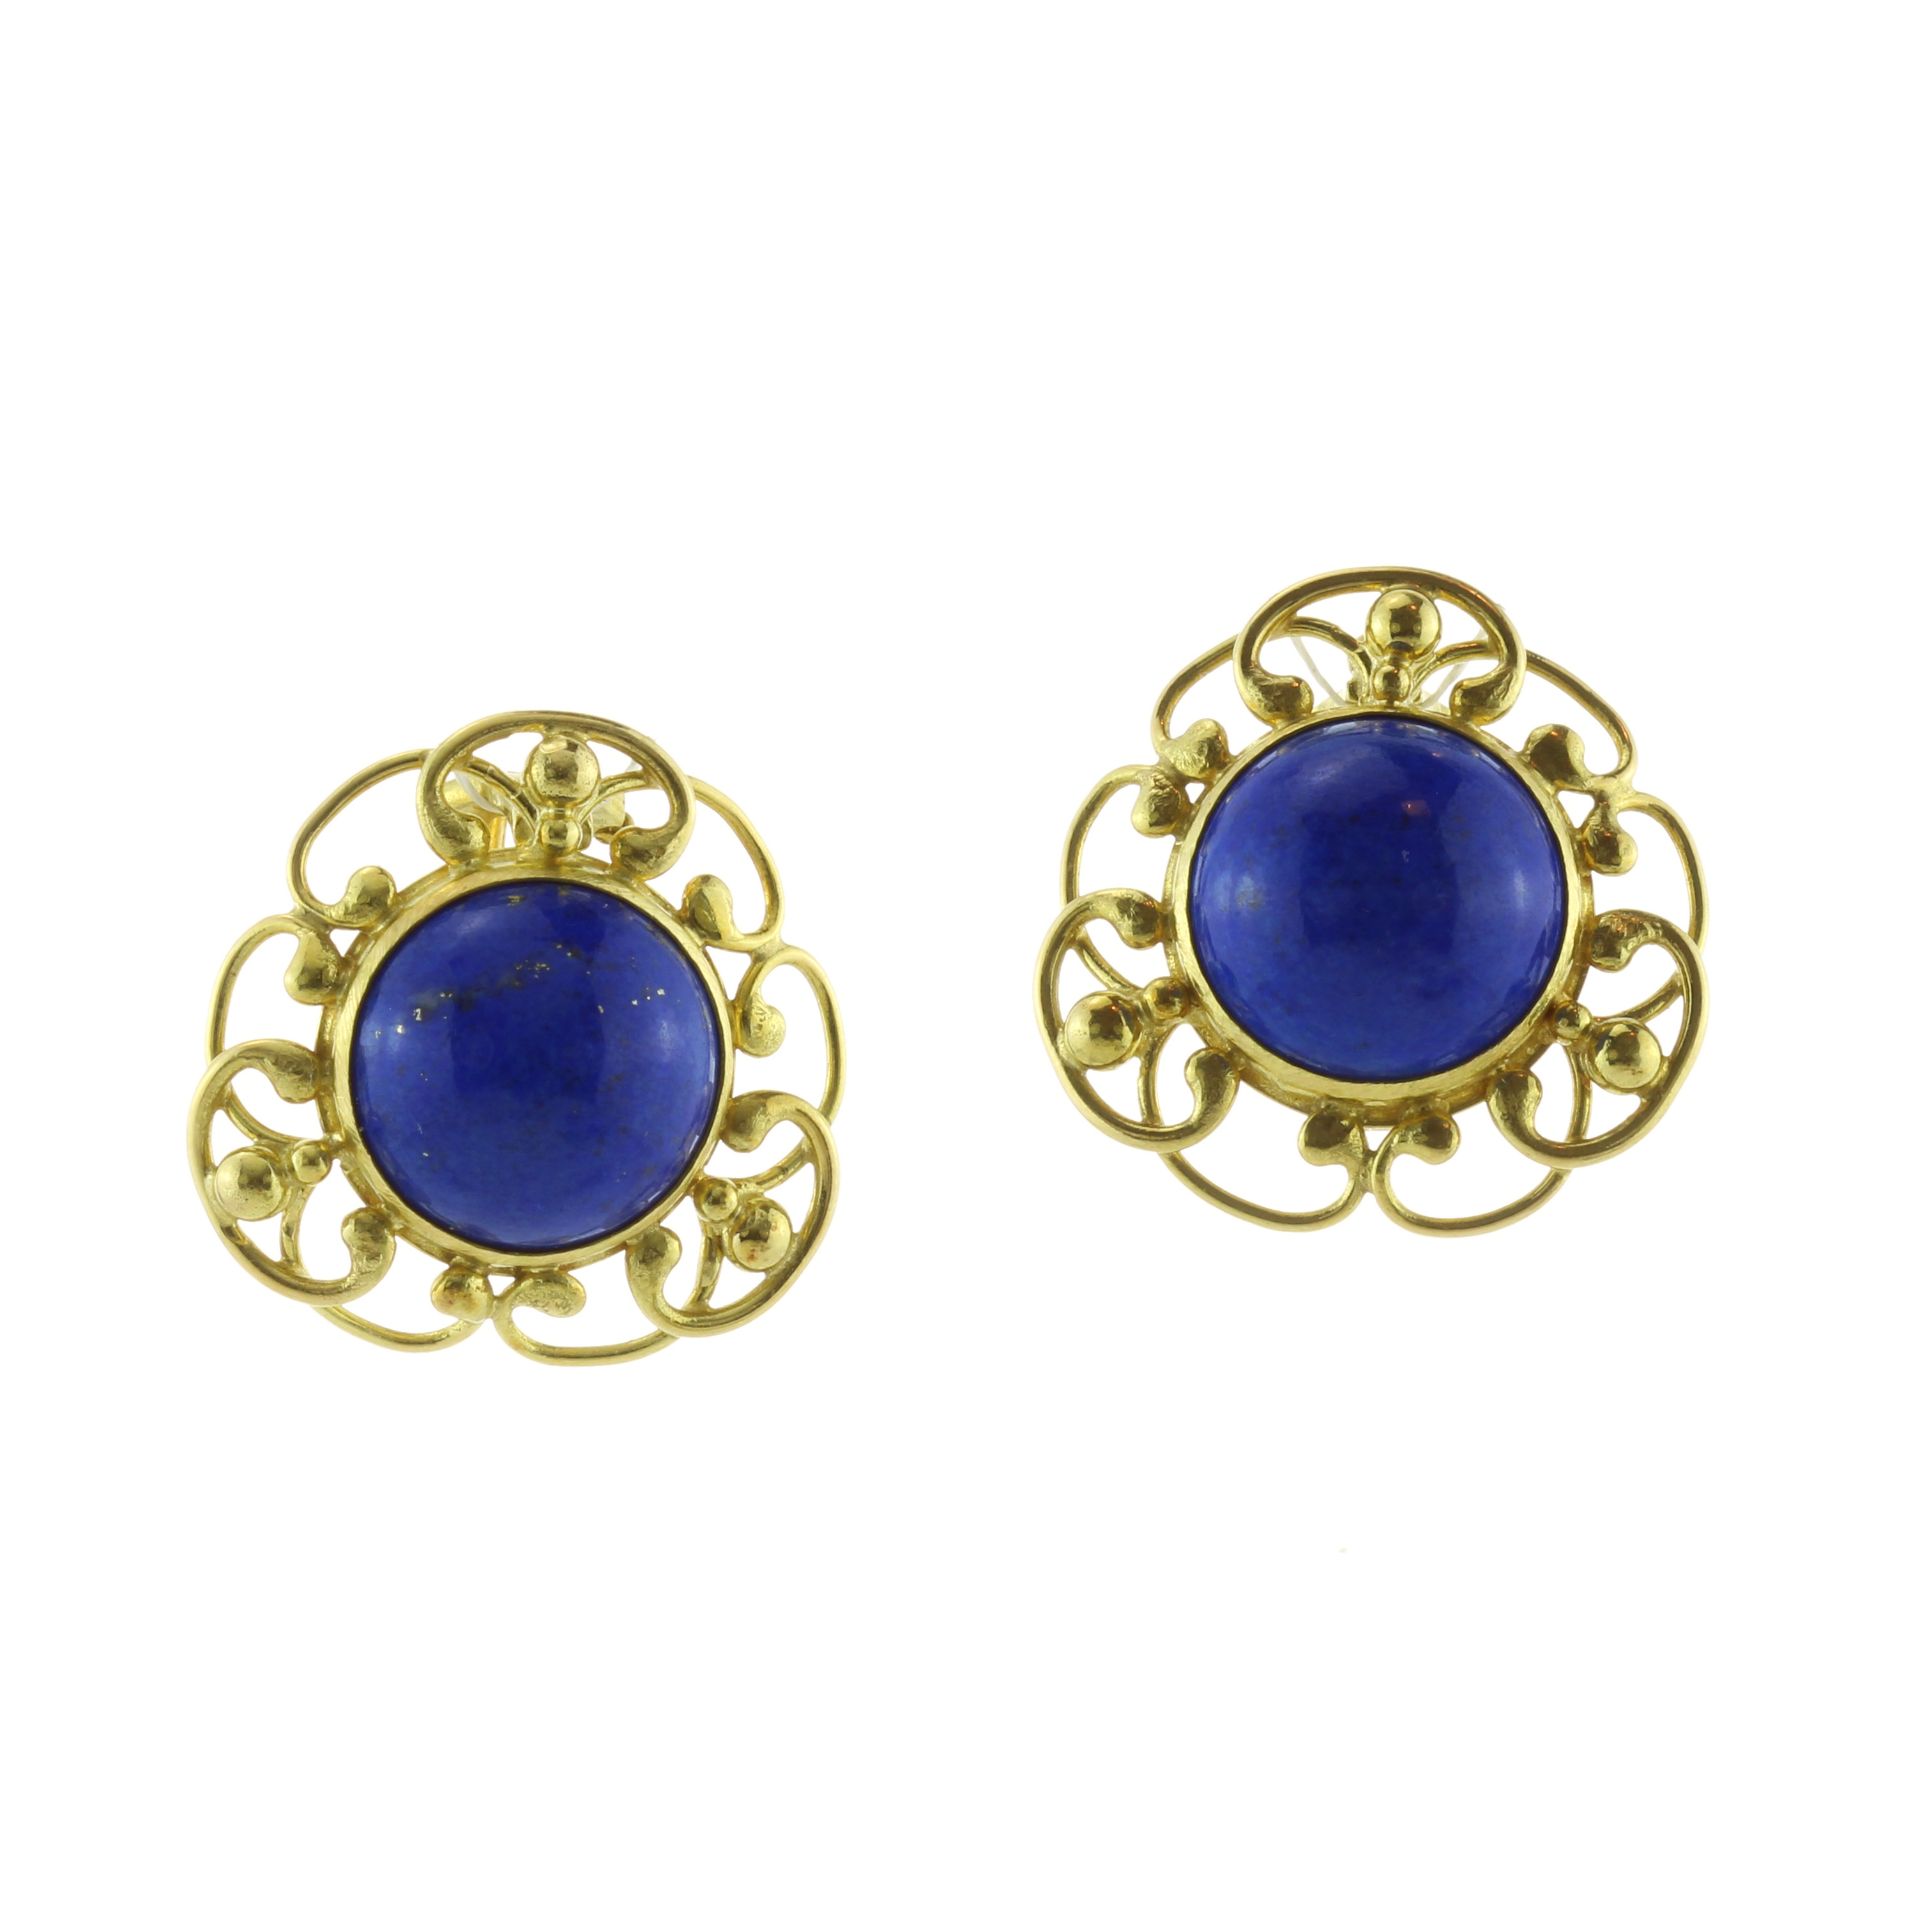 A pair of vintage lapis lazuli earrings in 18ct yellow gold each set with a circular lapis lazuli